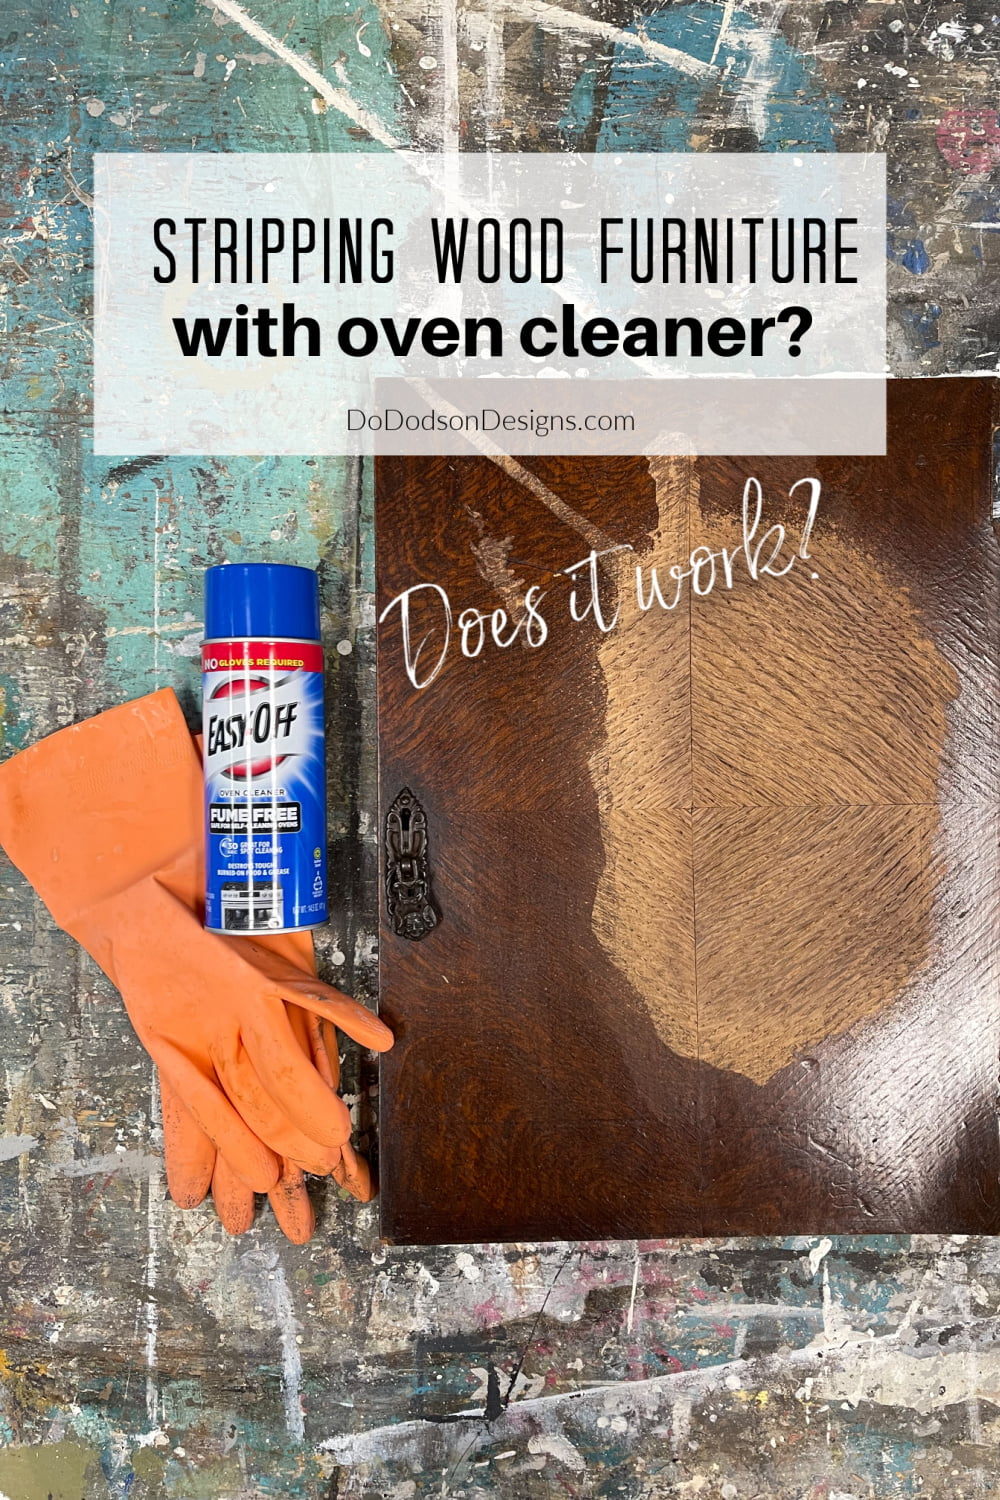 Stripping Wood Furniture With Oven Cleaner - Does It Work?